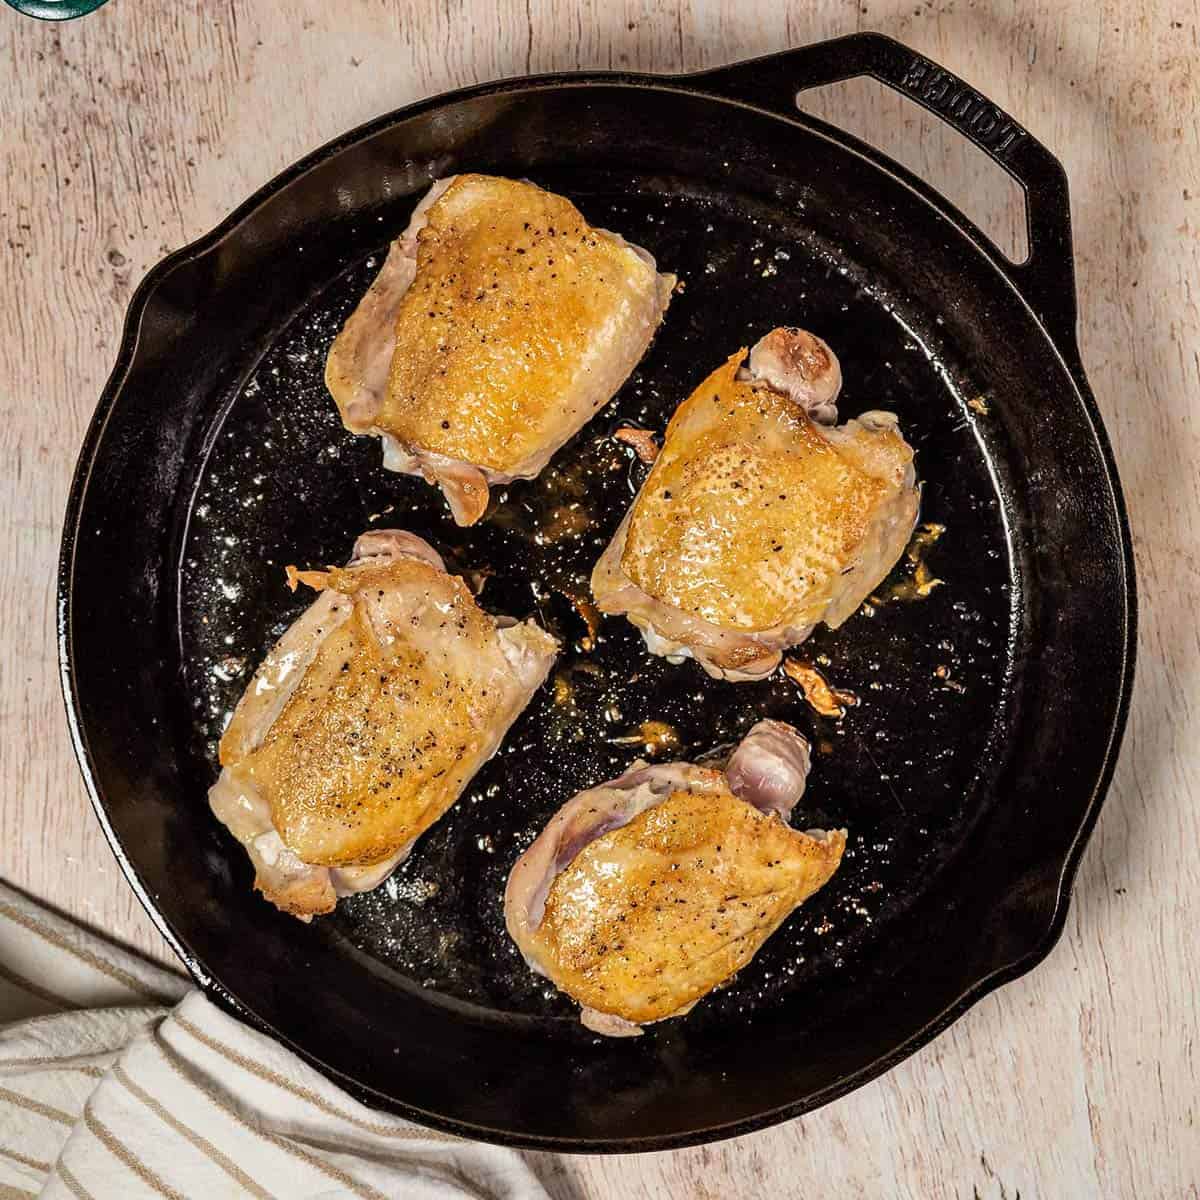 Chicken dish; what is the right cooked temp of chicken?